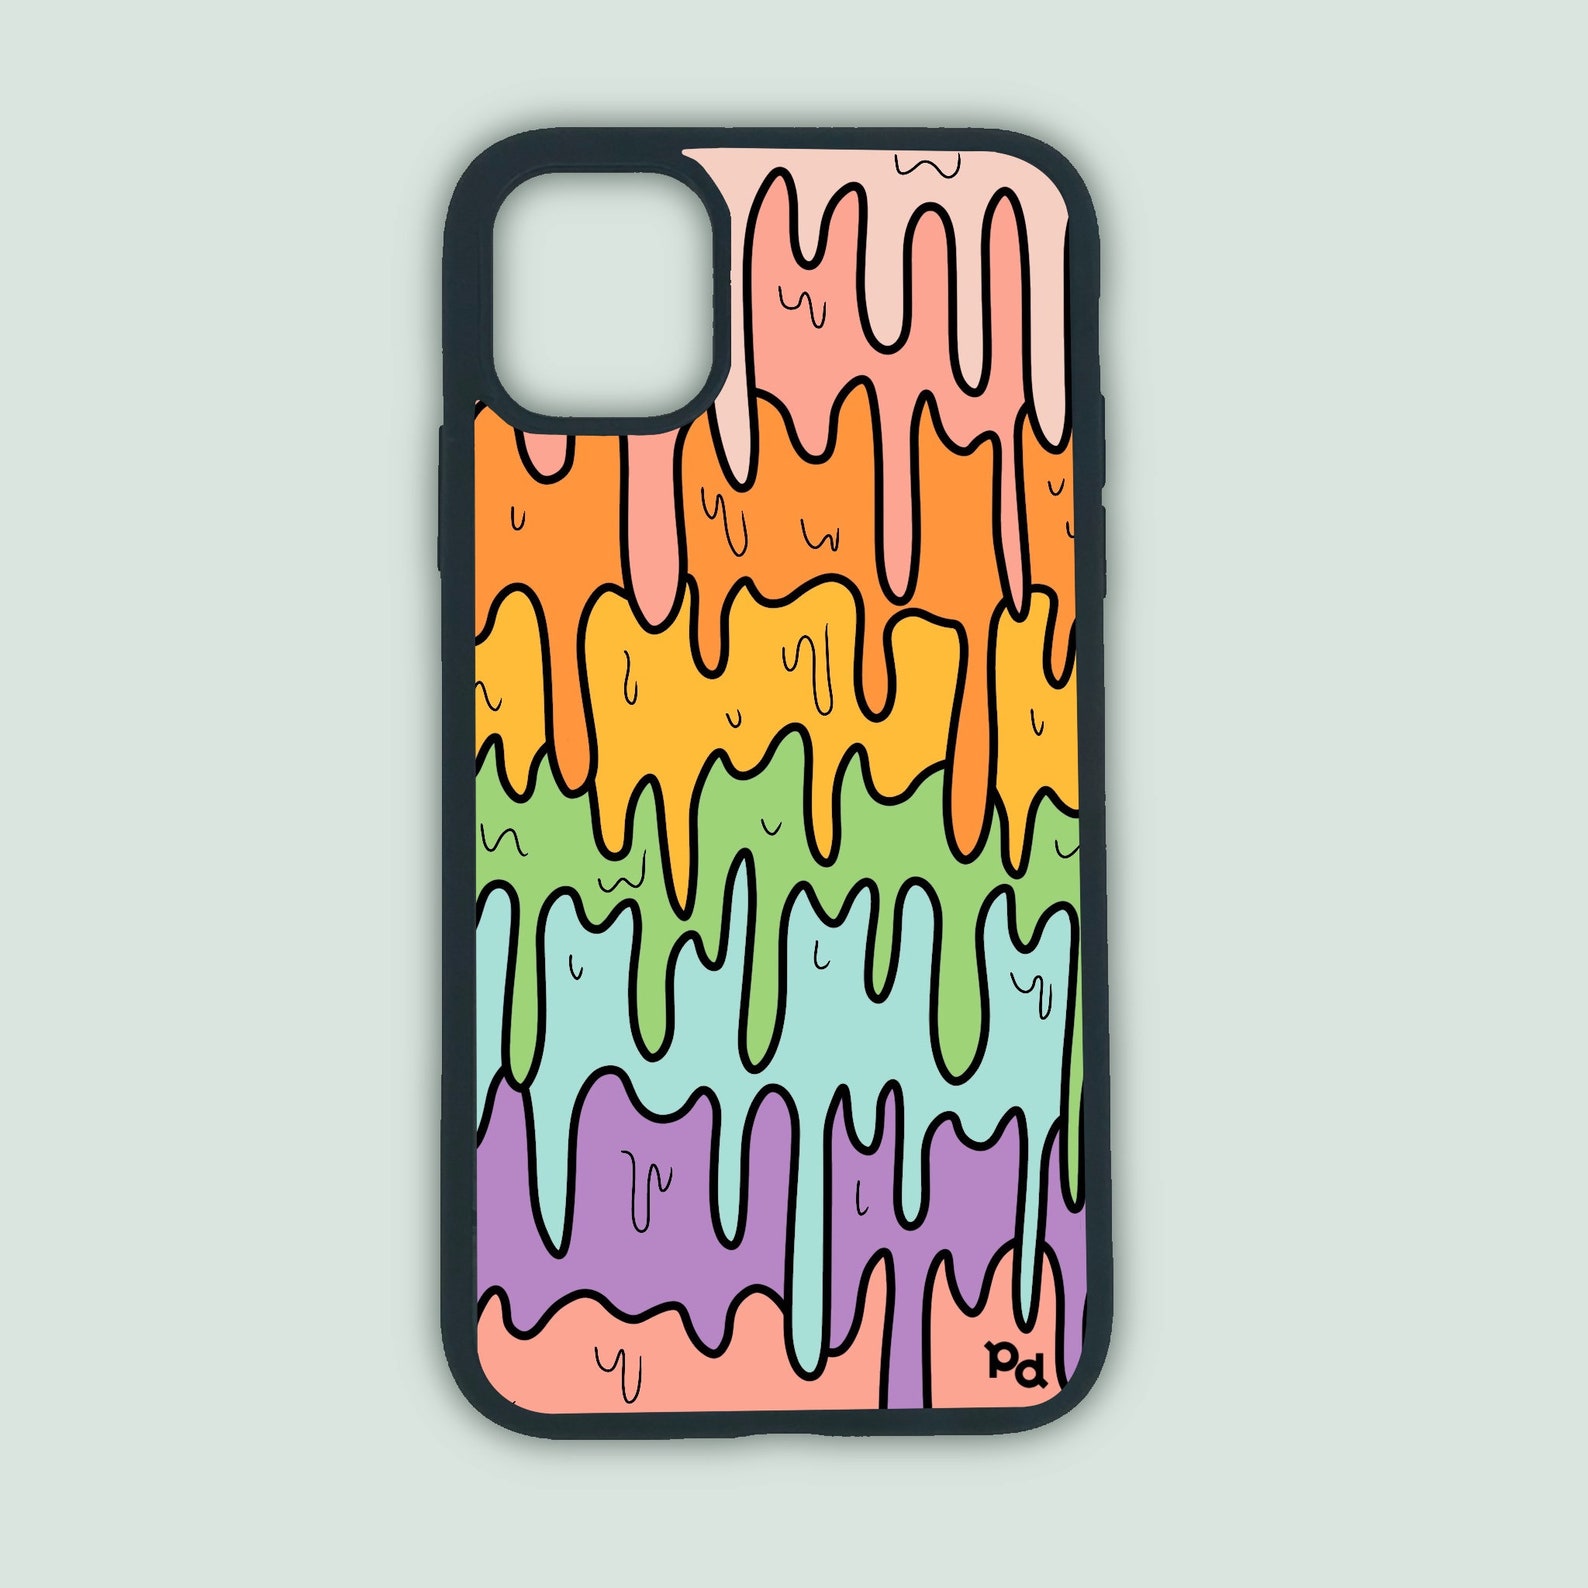 Drippy Phone Case Samsung & Iphone Cases - Etsy